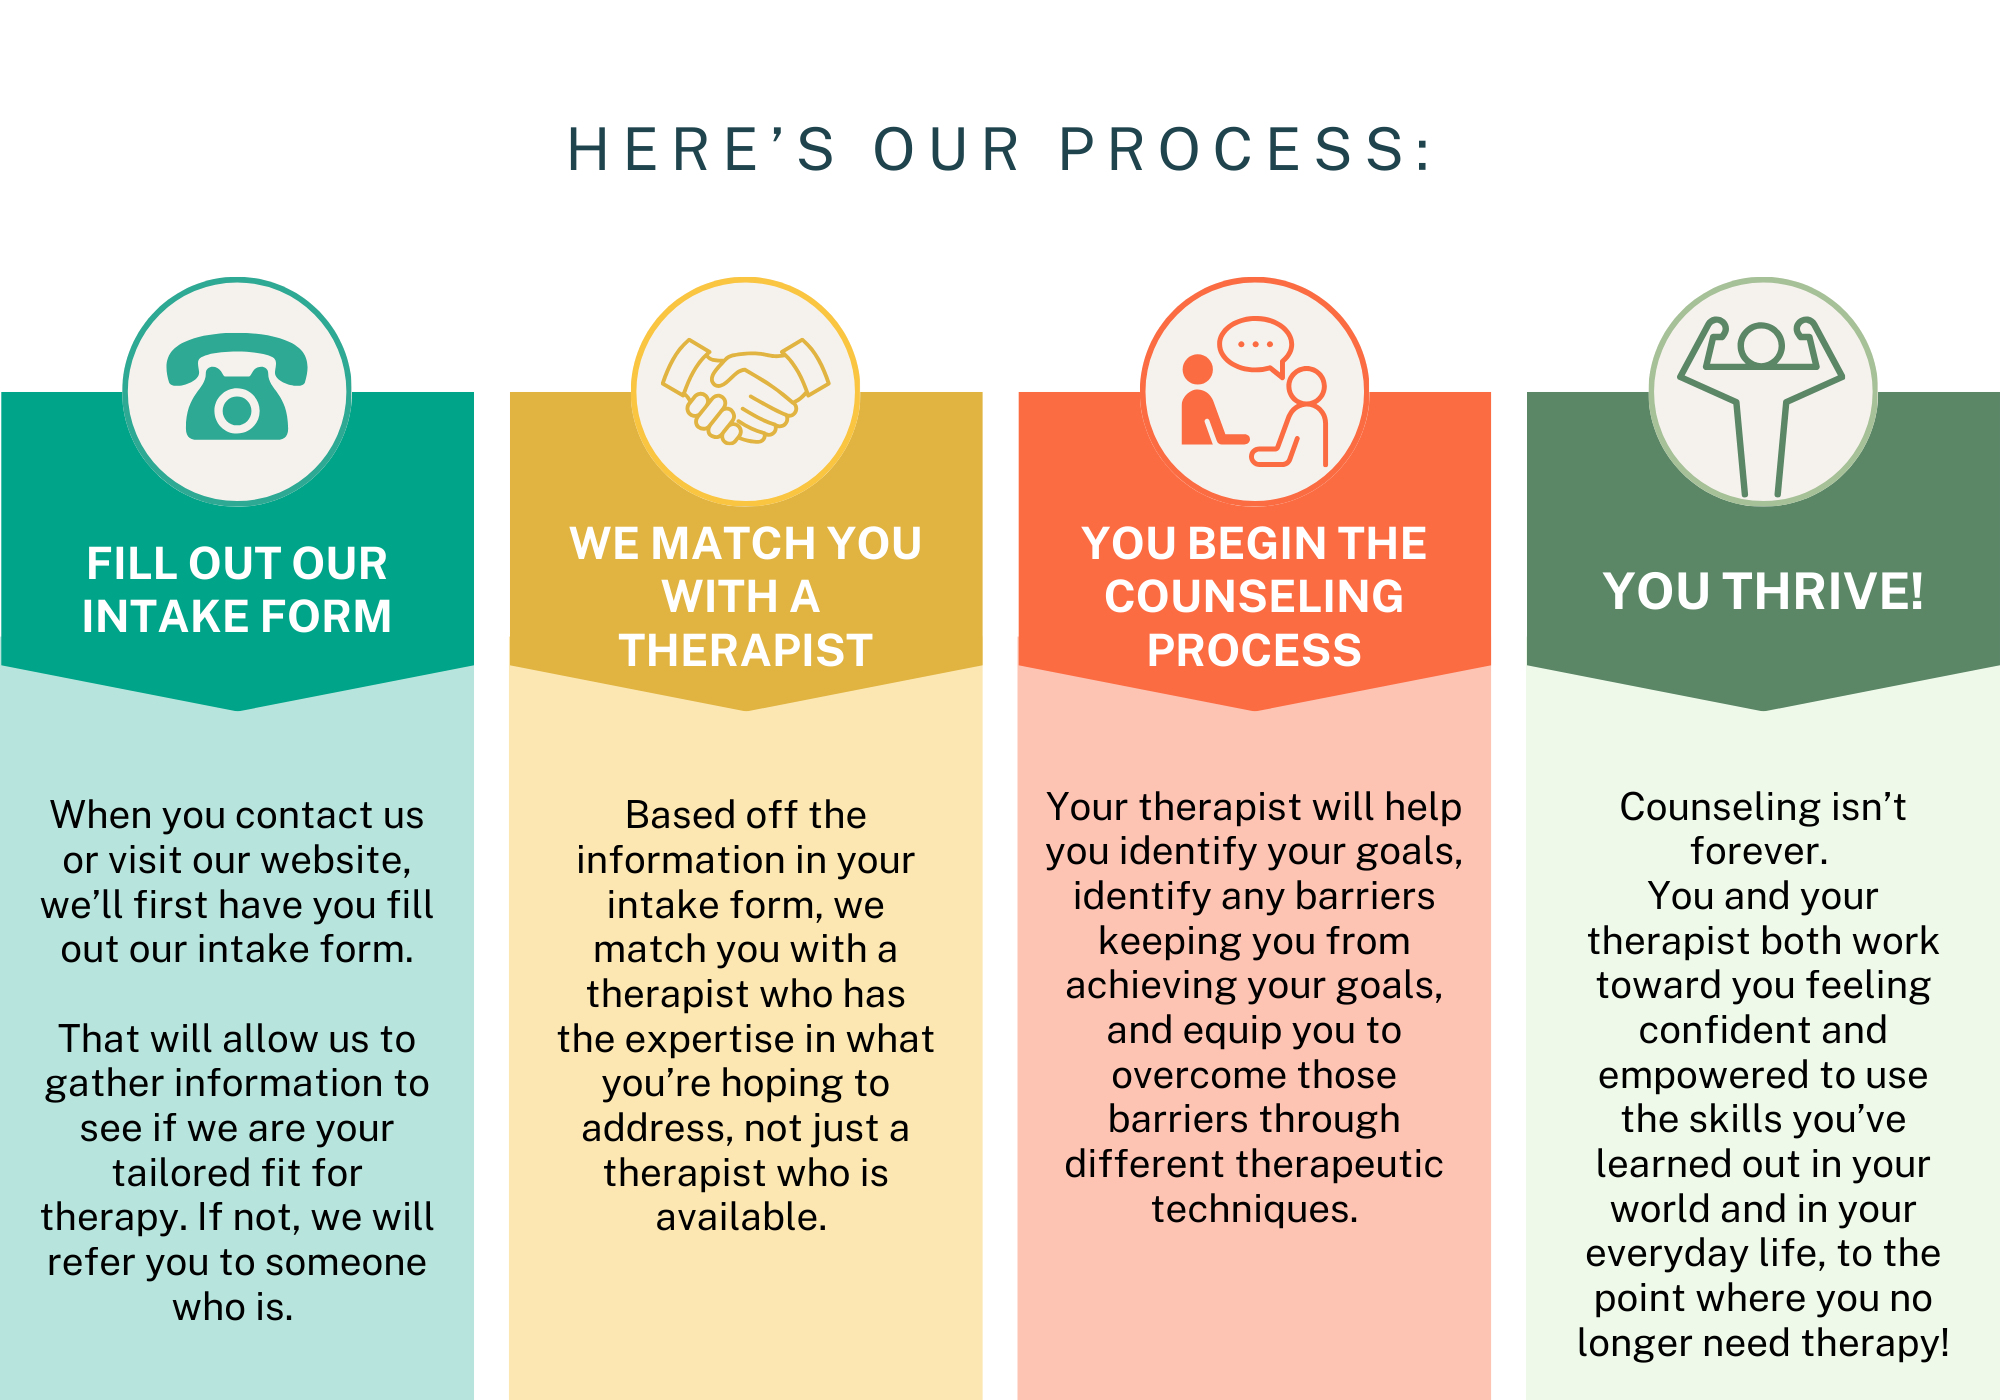 Here's a description of what our counseling process looks like for clients, from the moment they contact our office until they schedule their final session